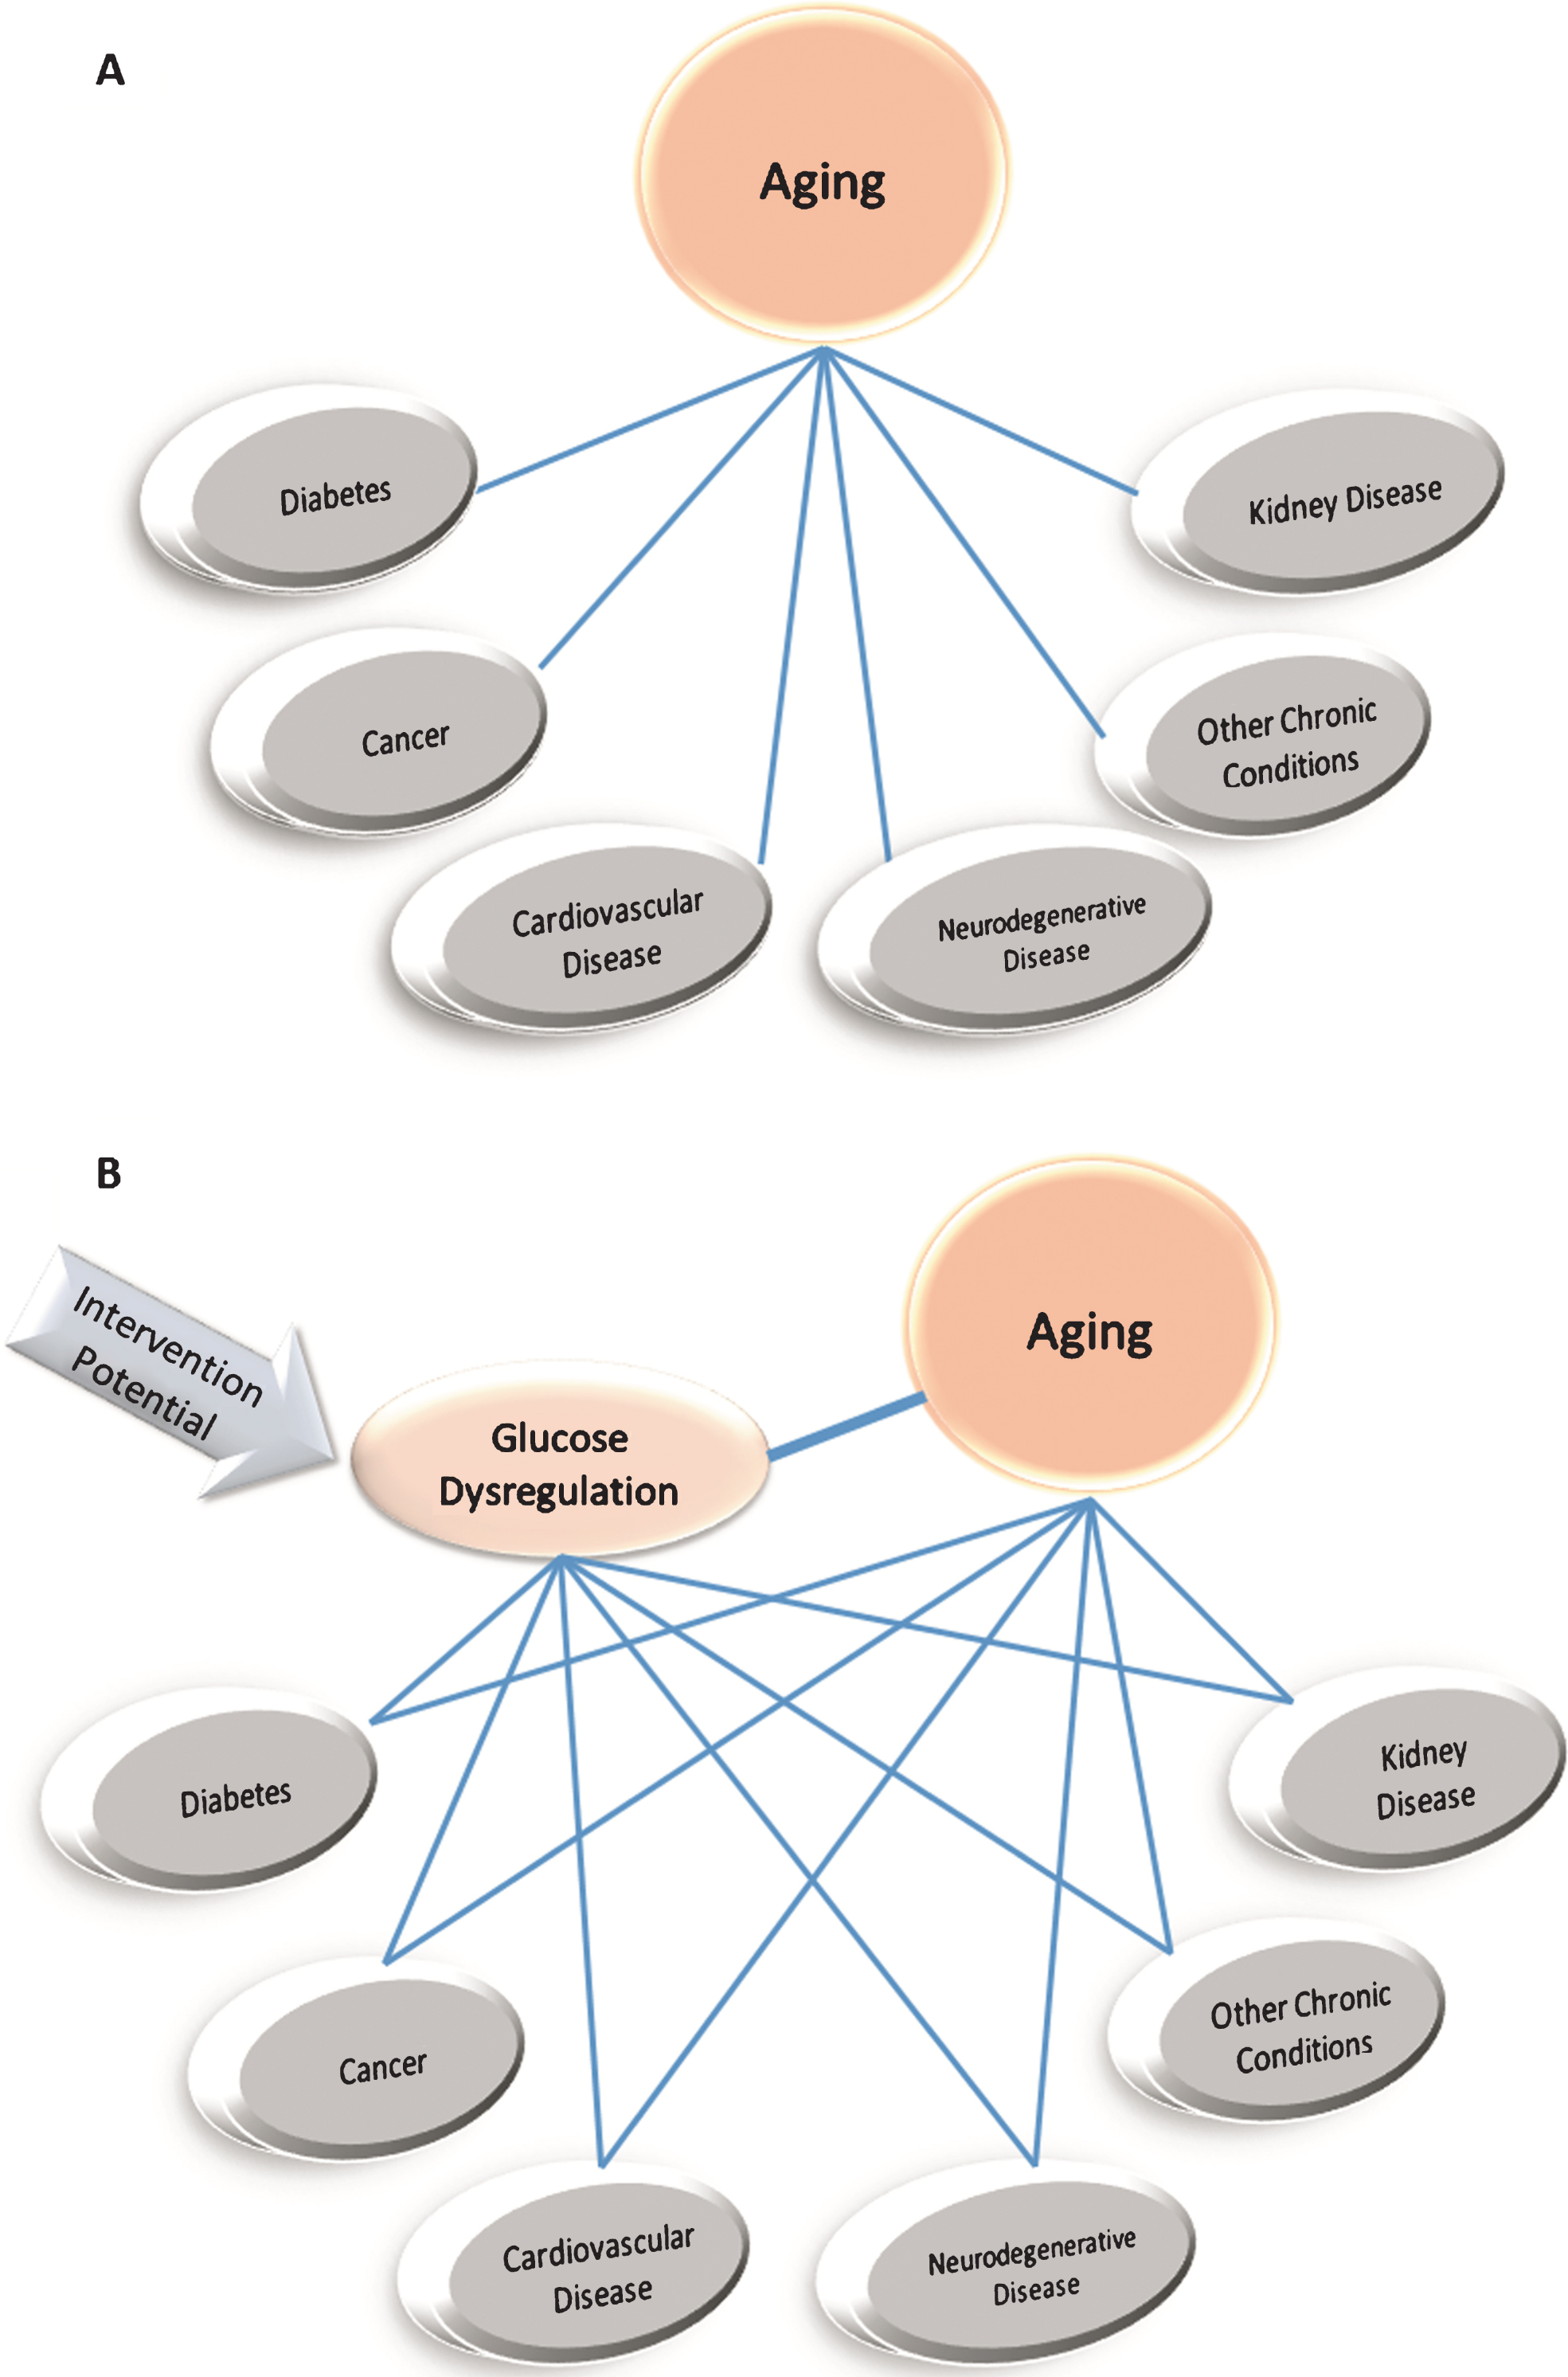 Aging as a risk factor for chronic disease. A. Aging is the number one risk factor for the most prevalent metabolic and chronic diseases in developed countries. B. Glucose dysregulation, however, is also a major risk factor for many of these same “age”-related diseases, suggesting interventions that maintain or improve glucoregulatory control to prevent, delay or treat T2D (e.g., acarbose, metformin) may have manifold benefits related to other chronic diseases associated with aging.